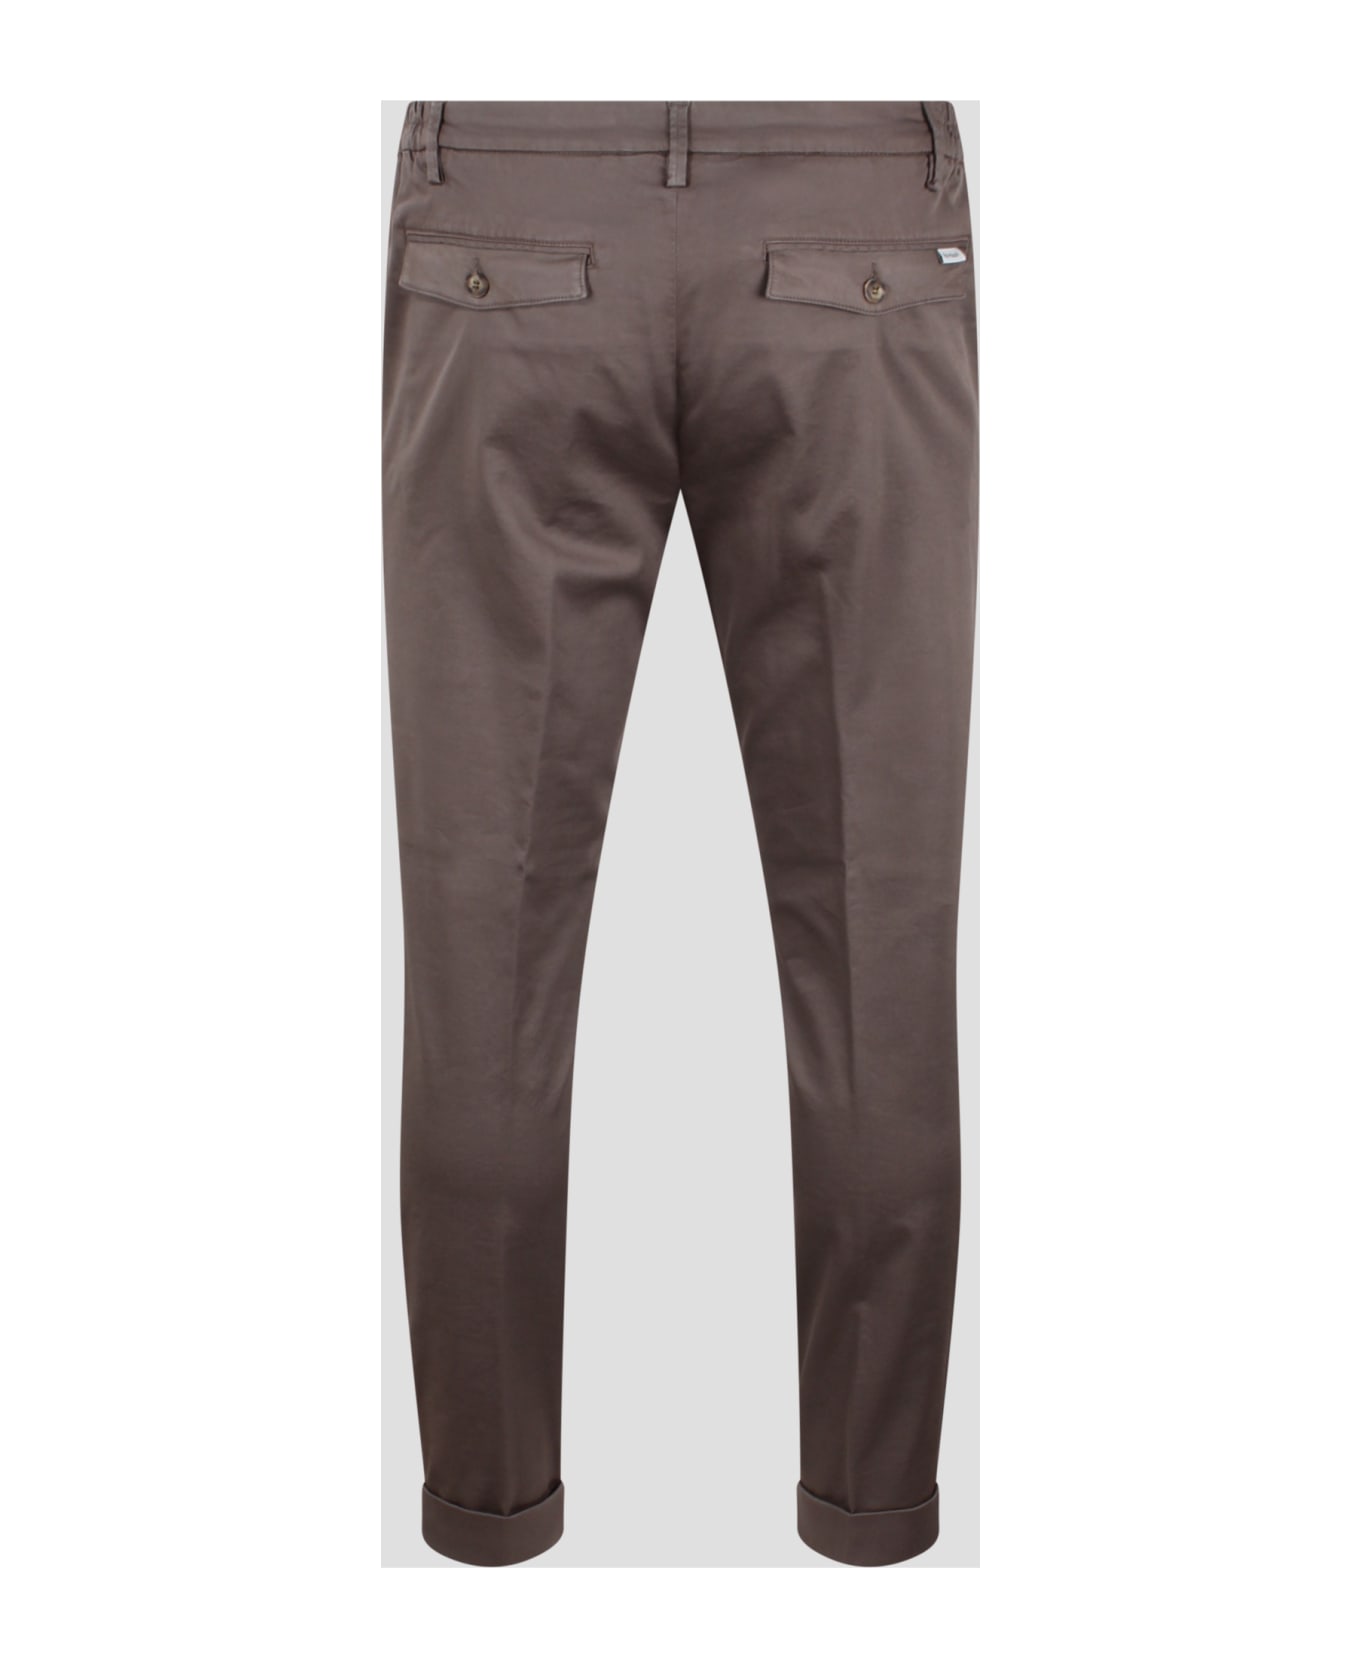 Re-HasH Mucha Tp Chino Pant - Nude & Neutrals